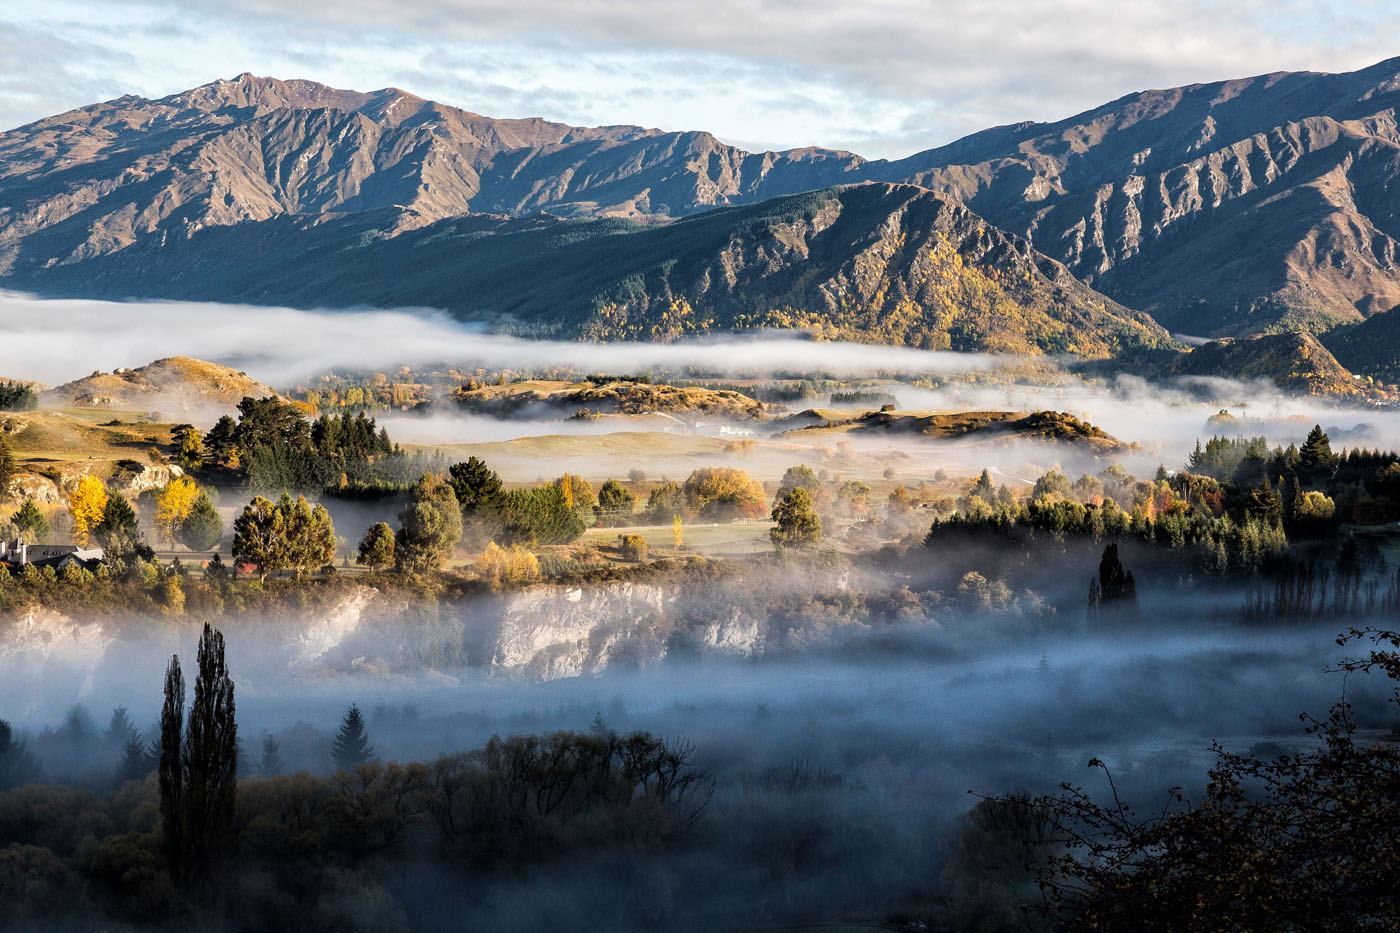 New Zealand in the mist